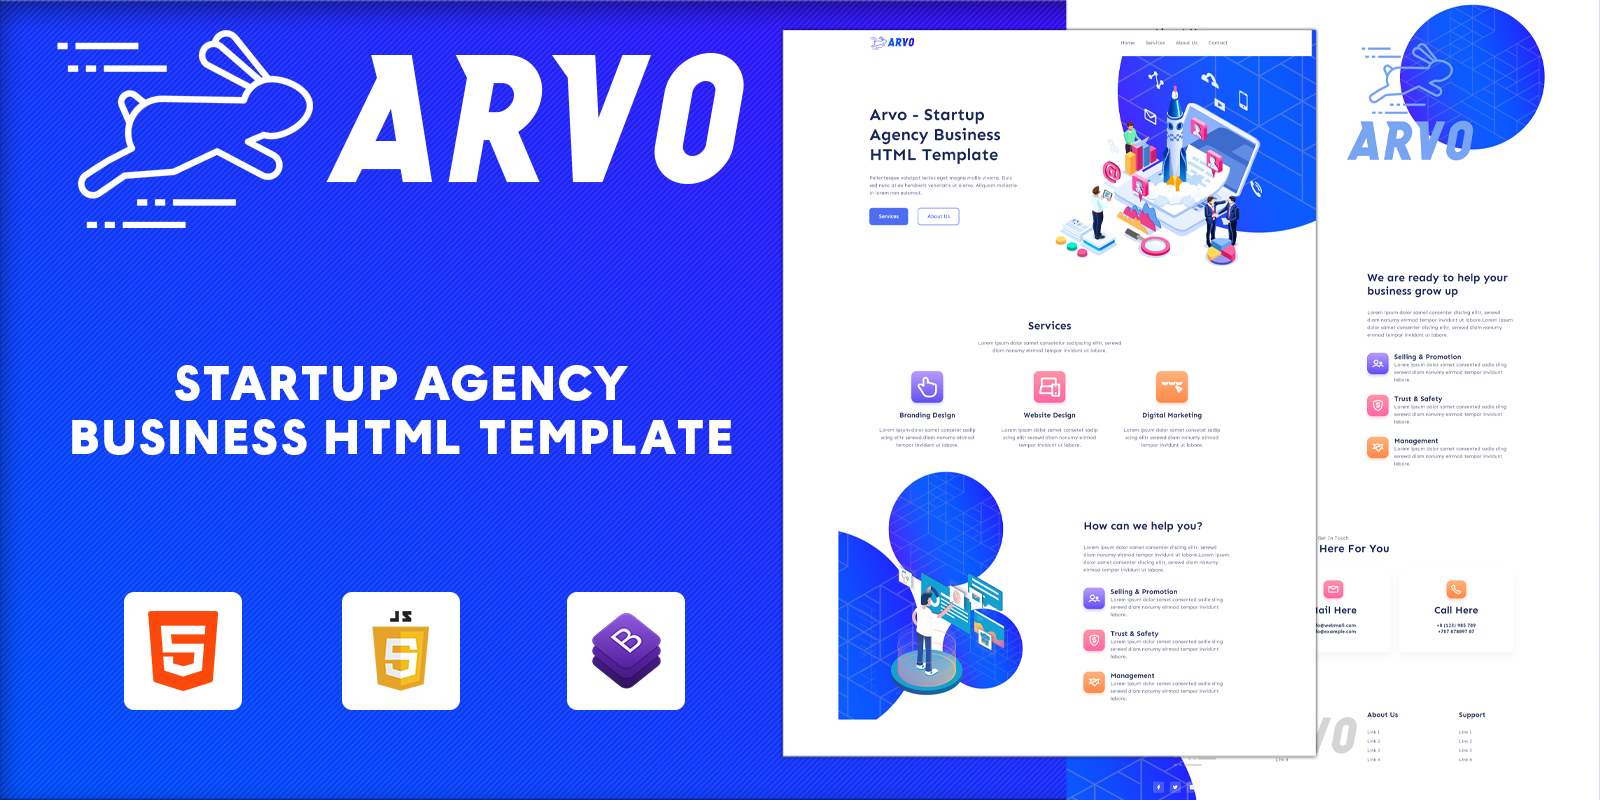 Arvo - Startup Agency Business HTML Template